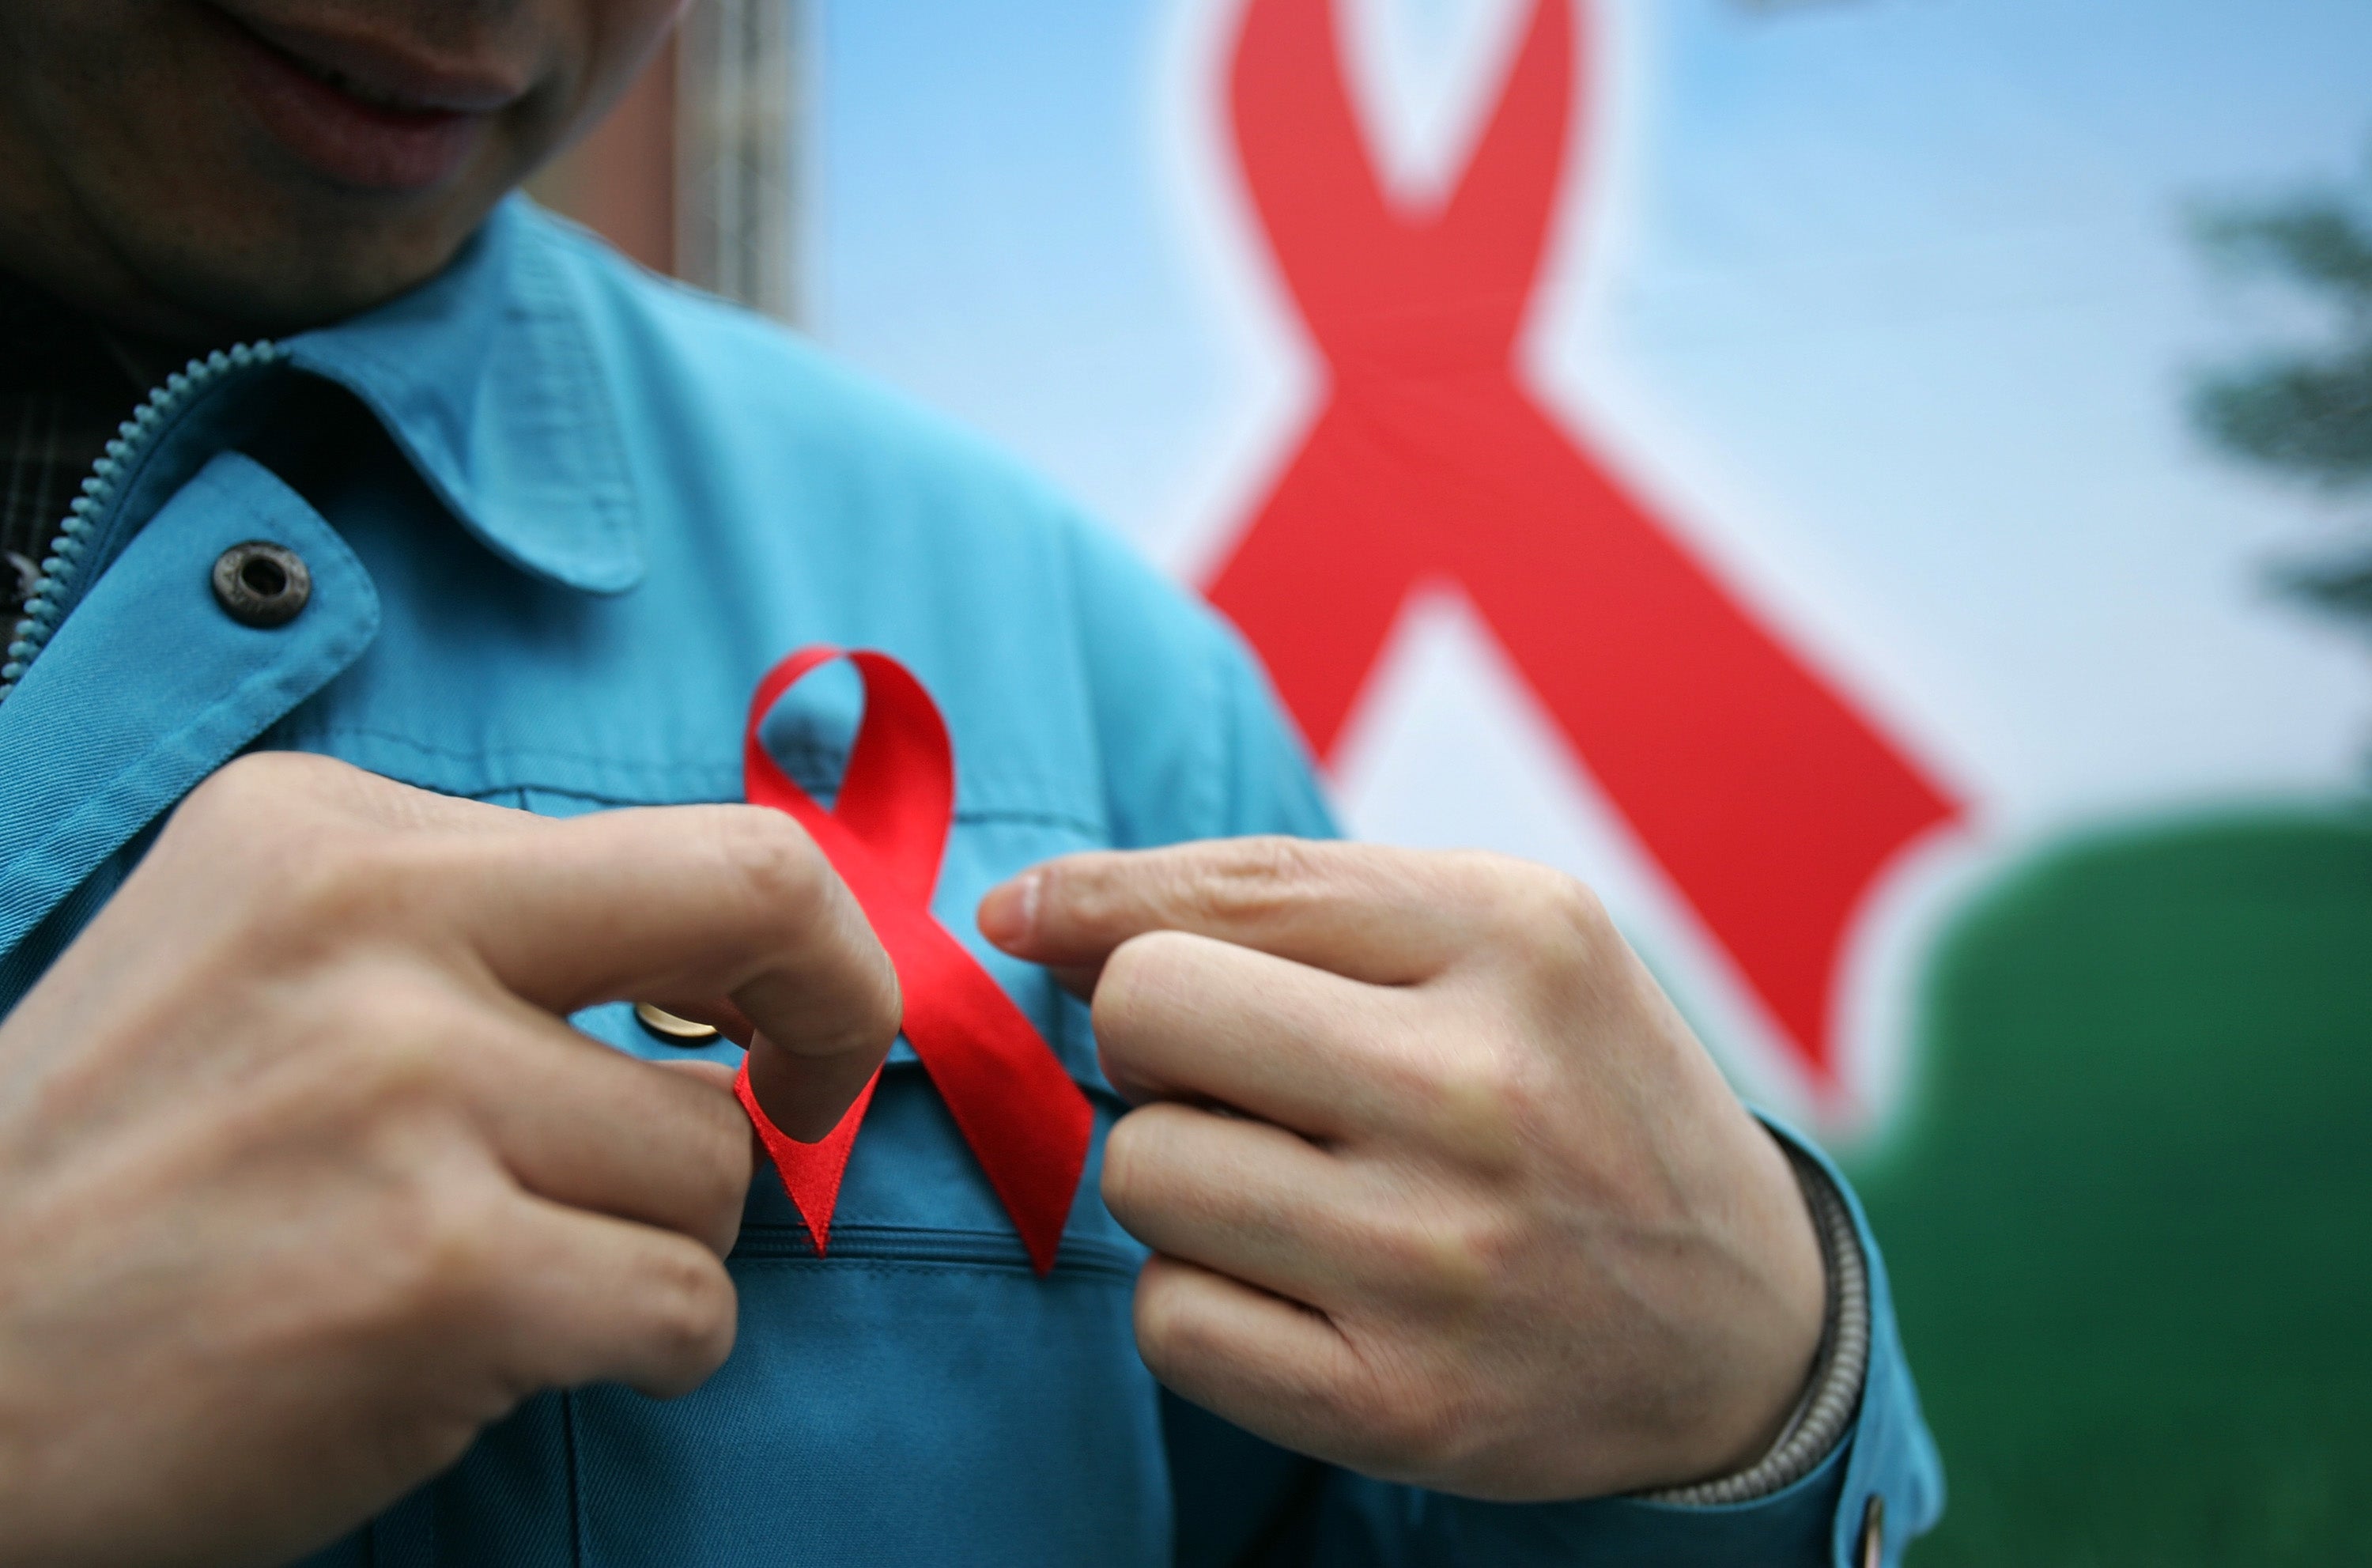 A migrant worker dons a red ribbon during an event to promote HIV/Aids knowledge in China in 2005